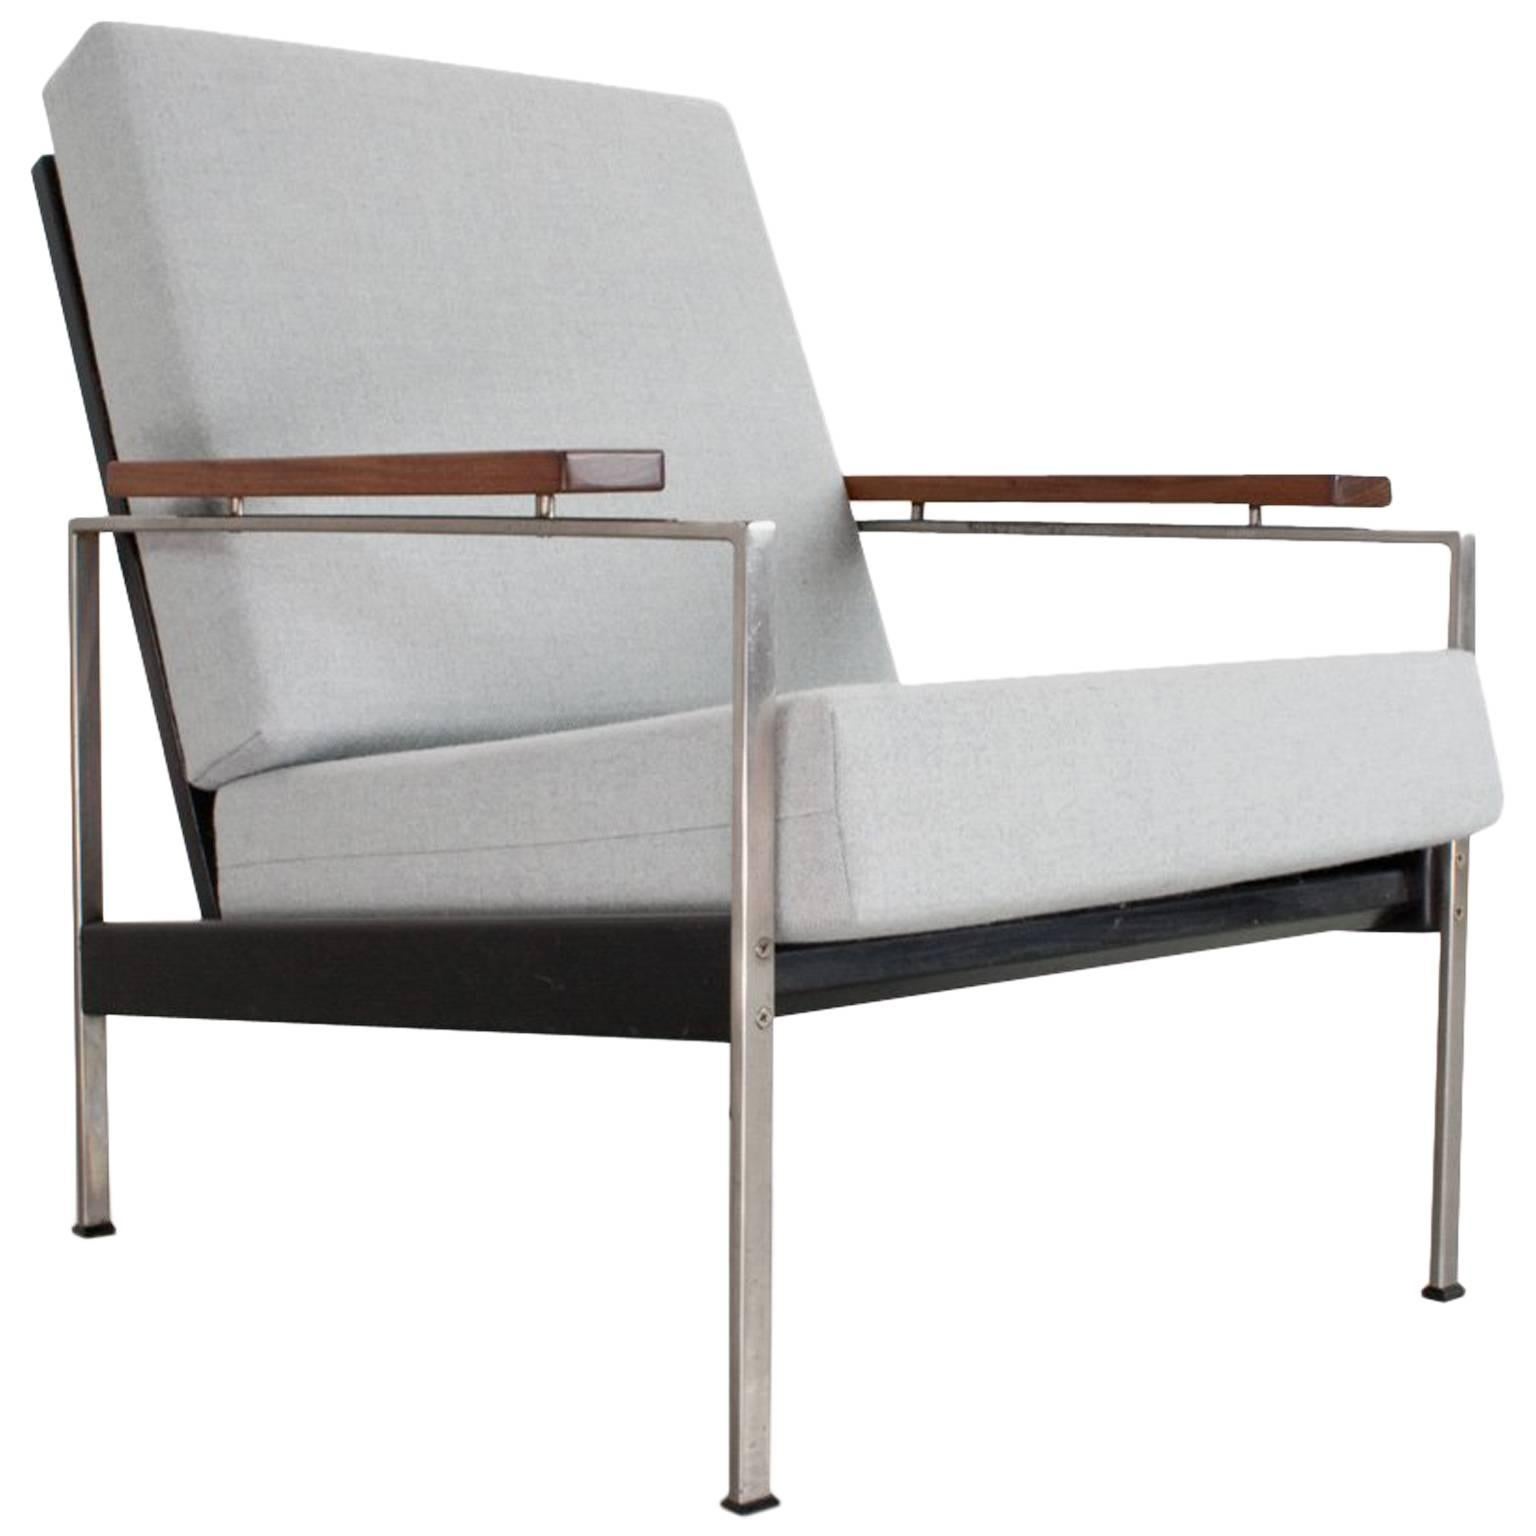 1950s Dutch Lounge Chair by Rob Parry Model Lotus, Midcentury Design